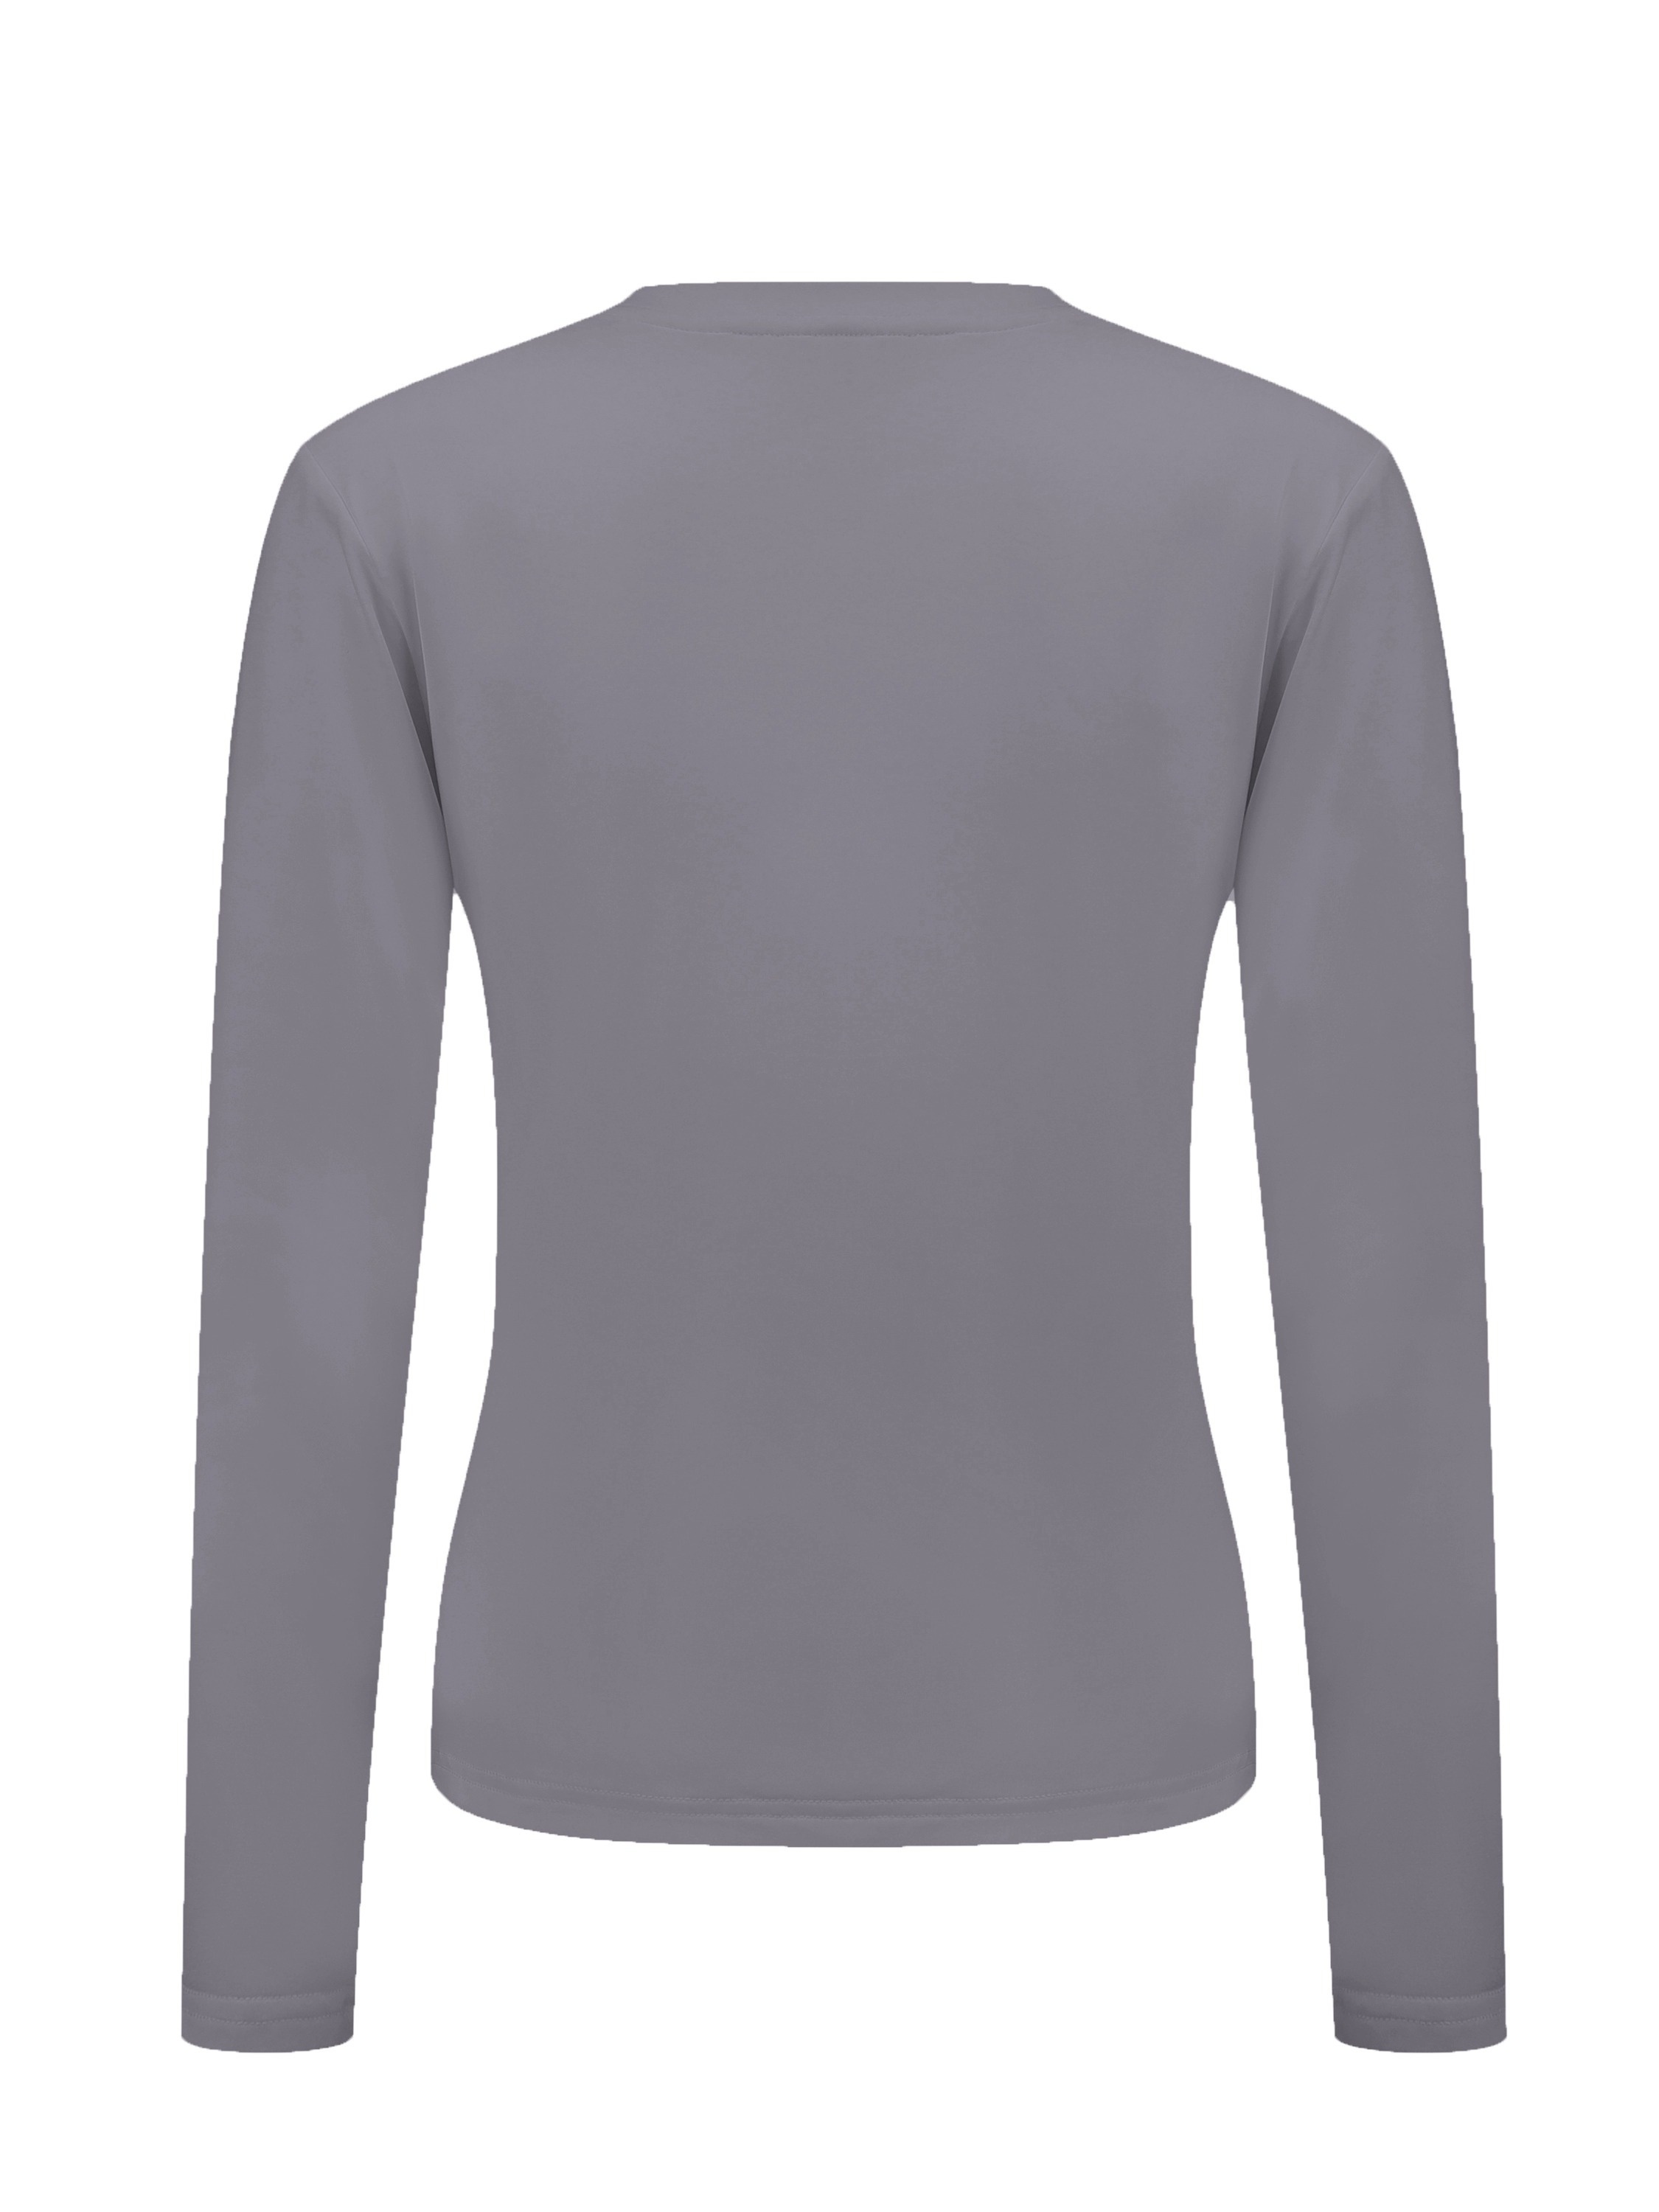 Time and Tru Women's Thermal Top with Long Sleeves, 2-Pack, Sizes XS-XXXL 